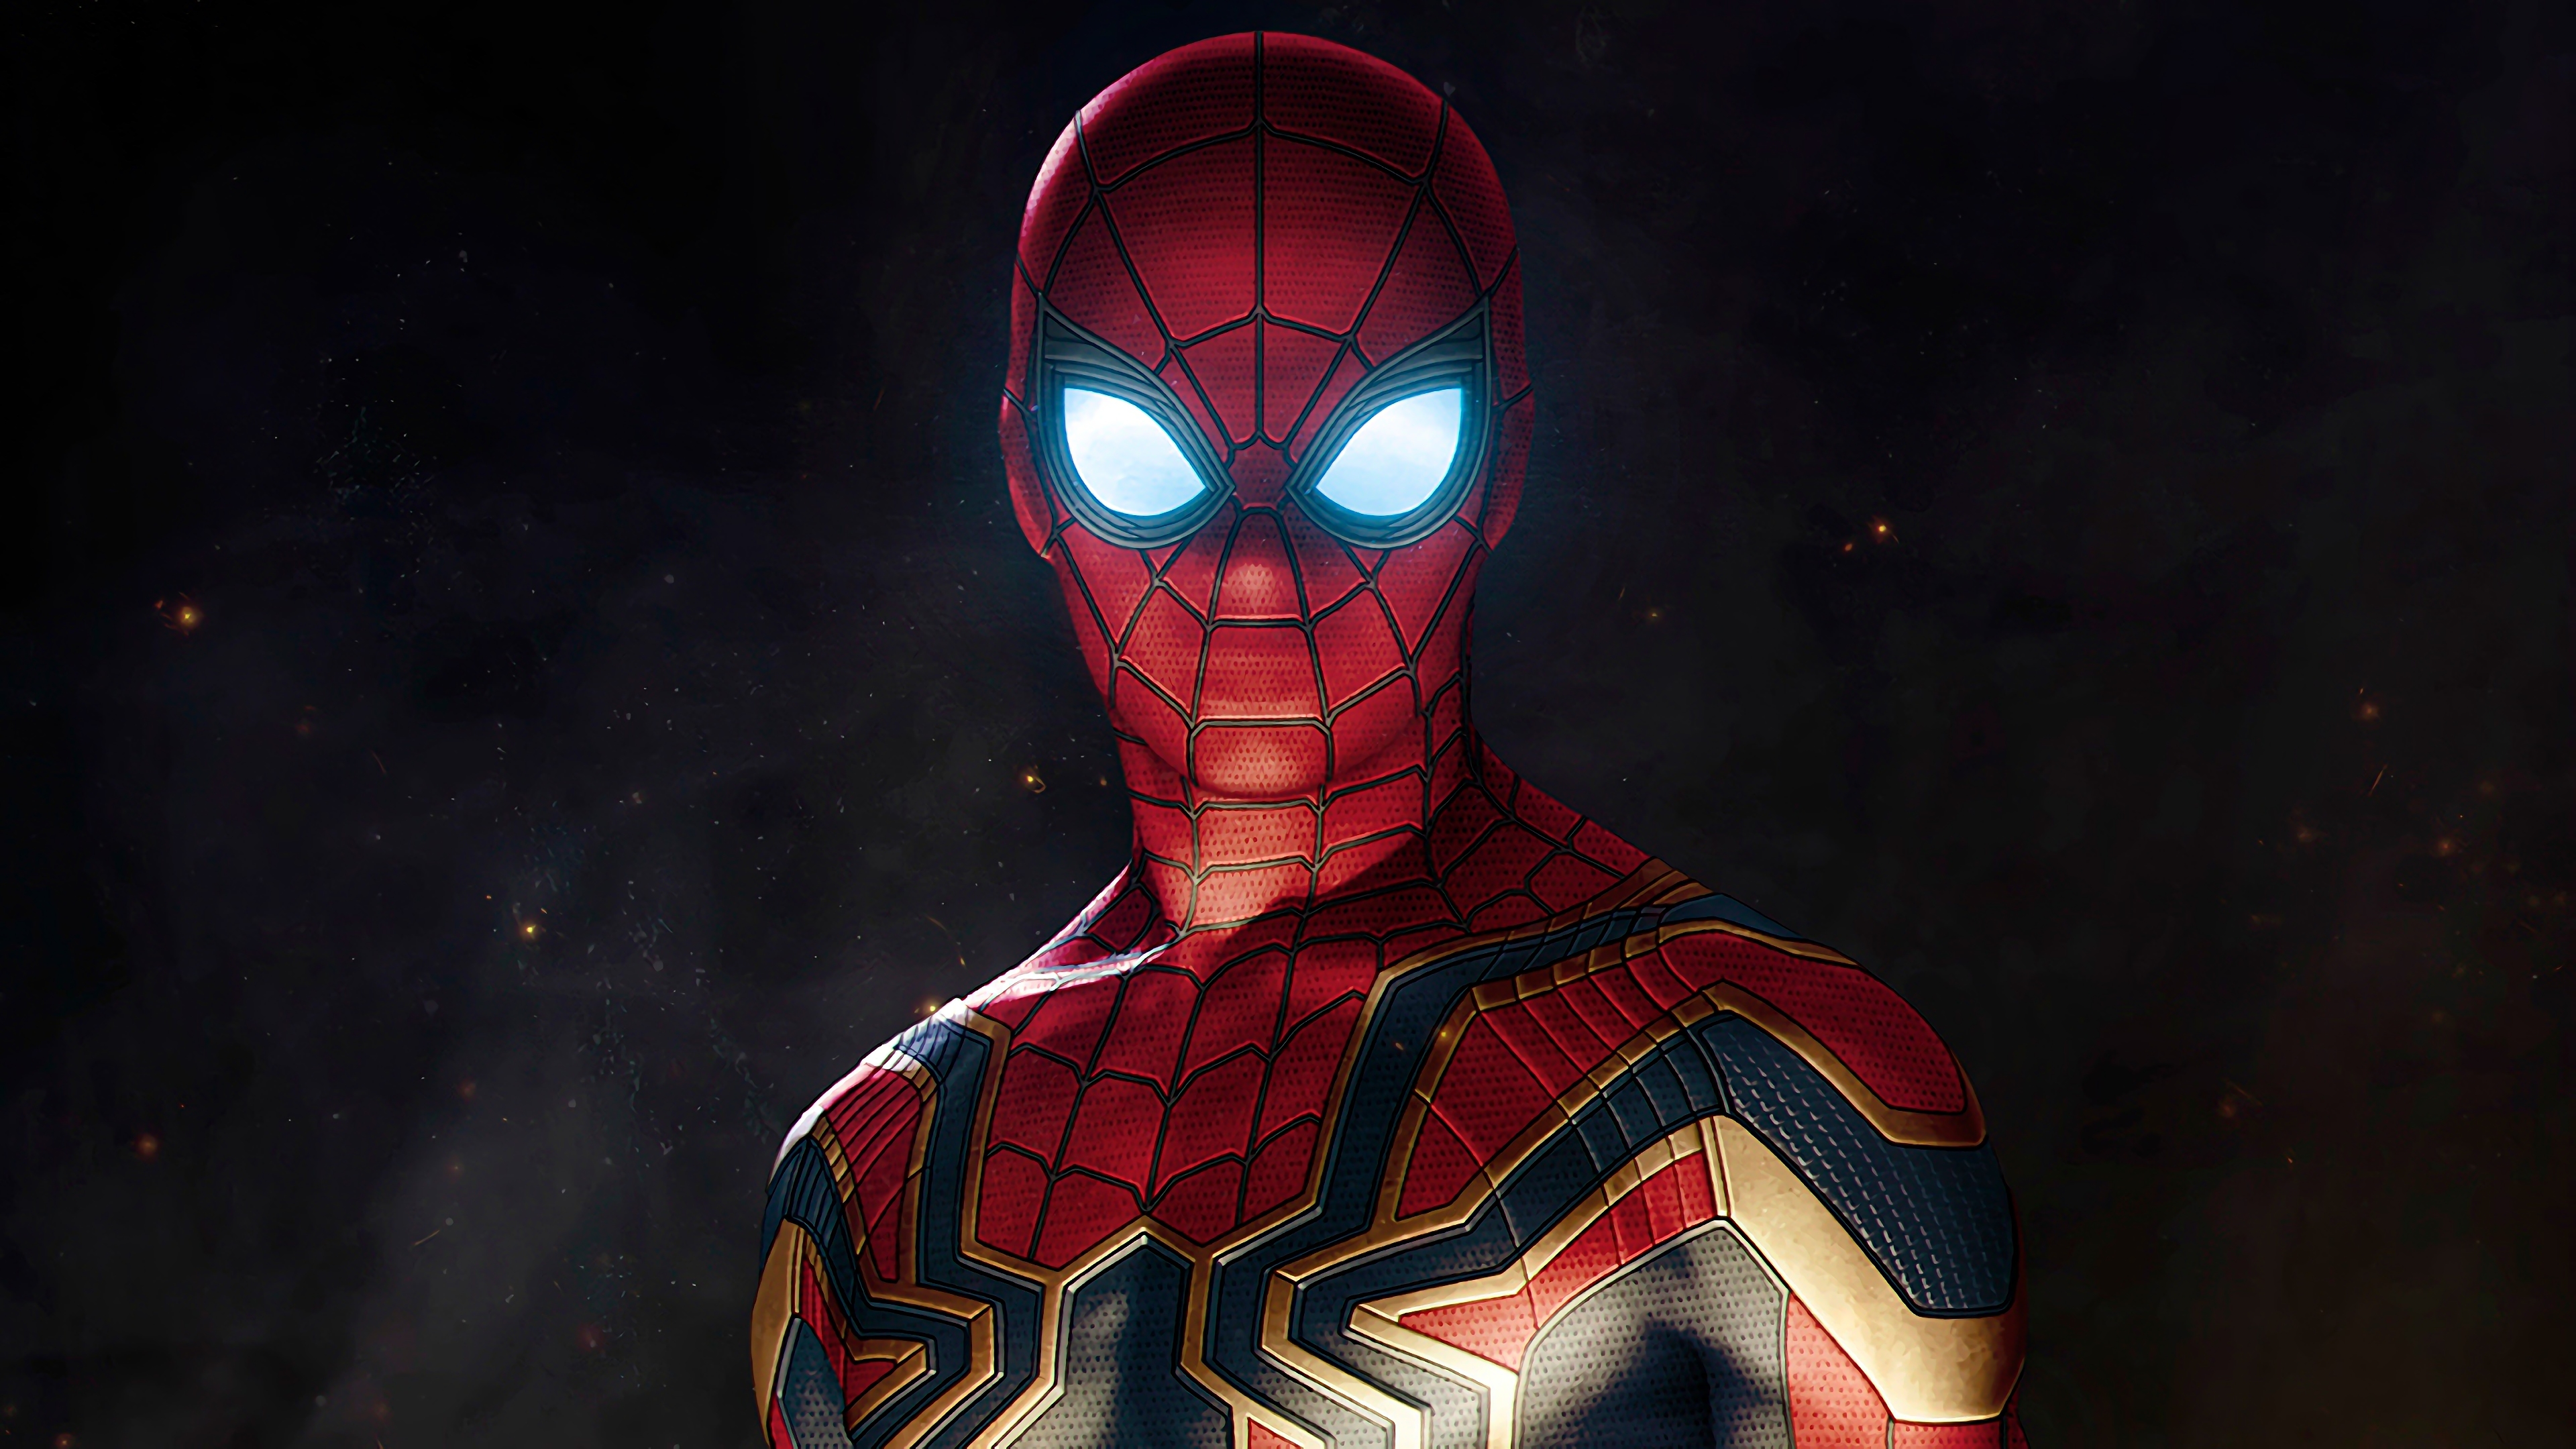 spider man, avengers: infinity war, glowing eyes, movie, peter parker, the avengers Full HD